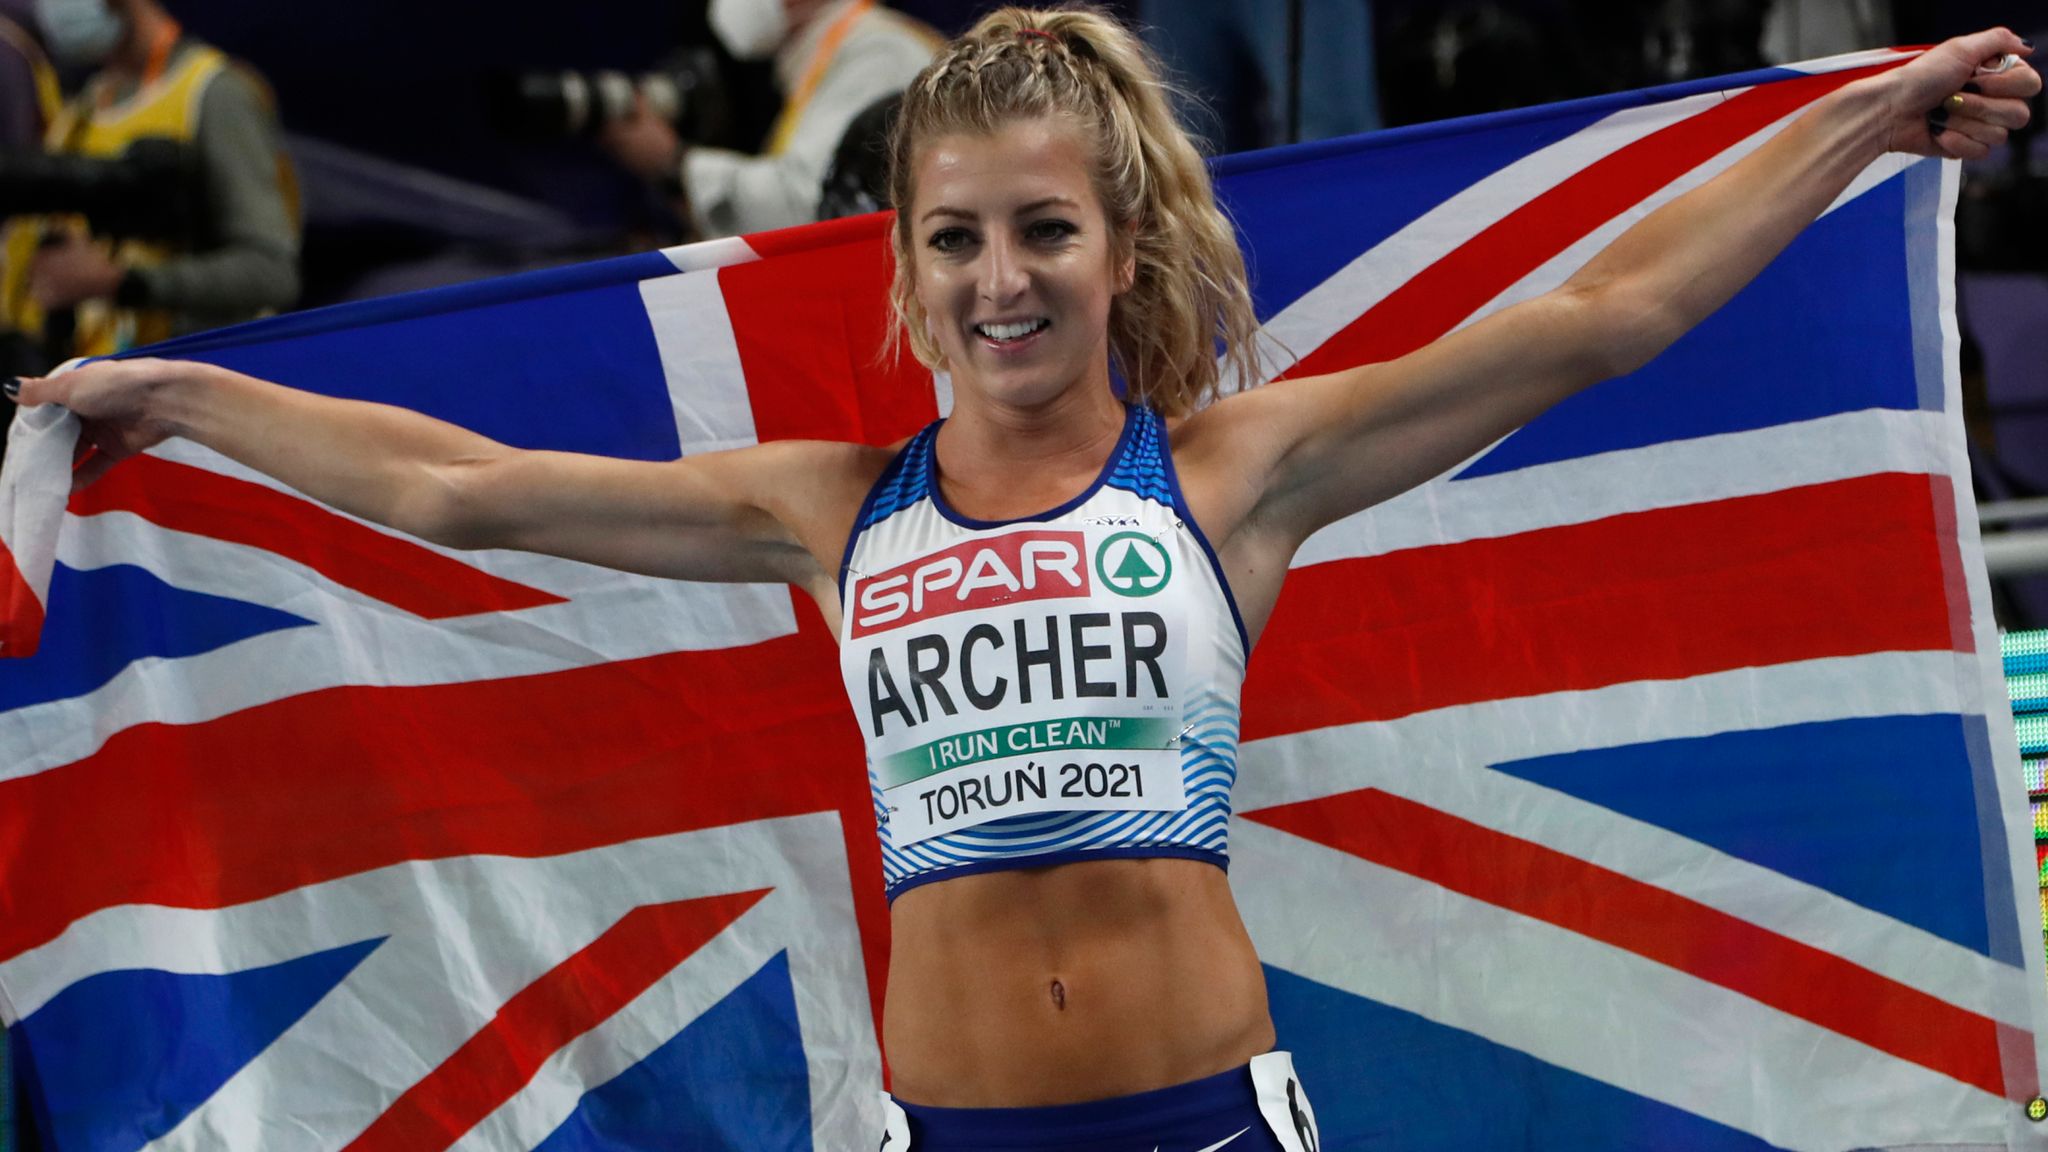 European Indoor Athletics Championships Holly Archer wins 1,500m silver after successful appeal Athletics News Sky Sports